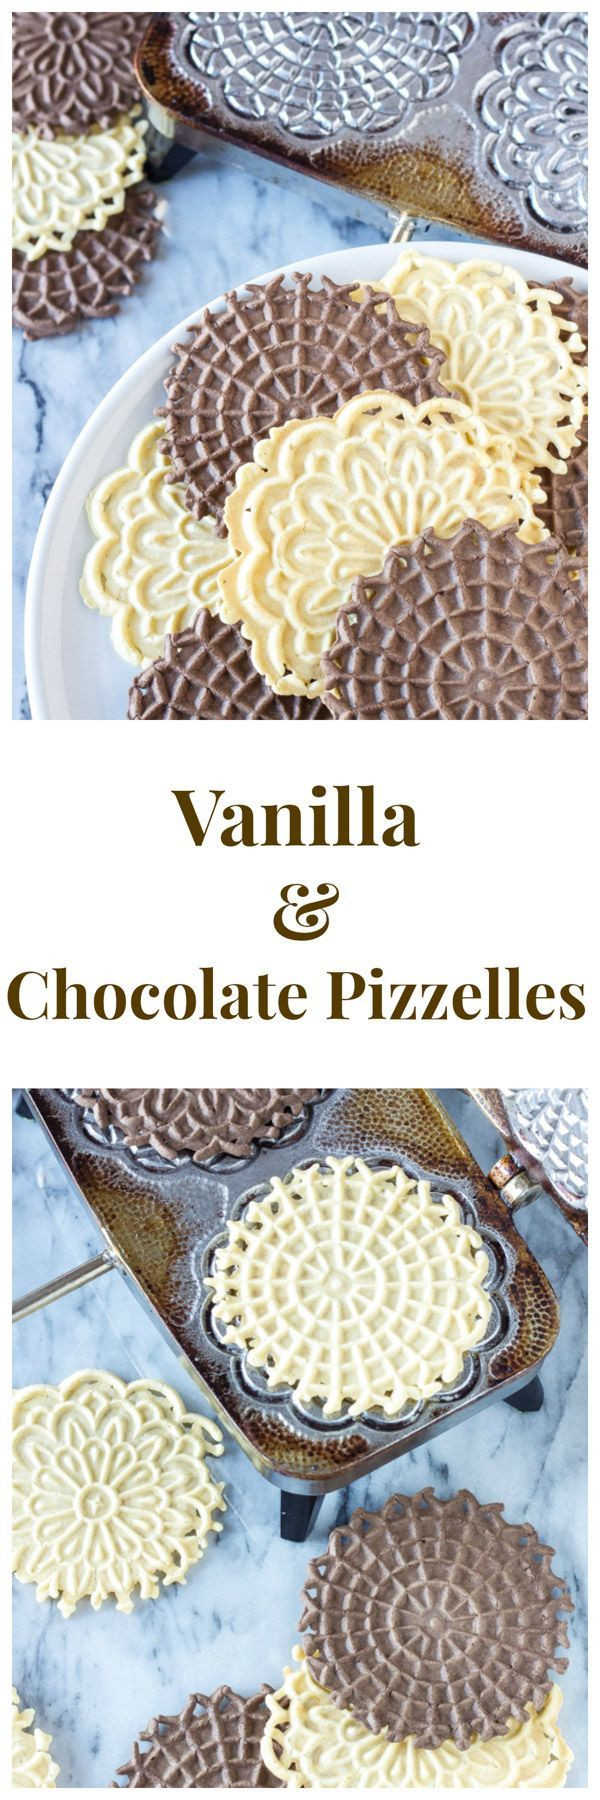 Pizzelle Italian Waffle Cookies
 Vanilla and Chocolate Pizzelles